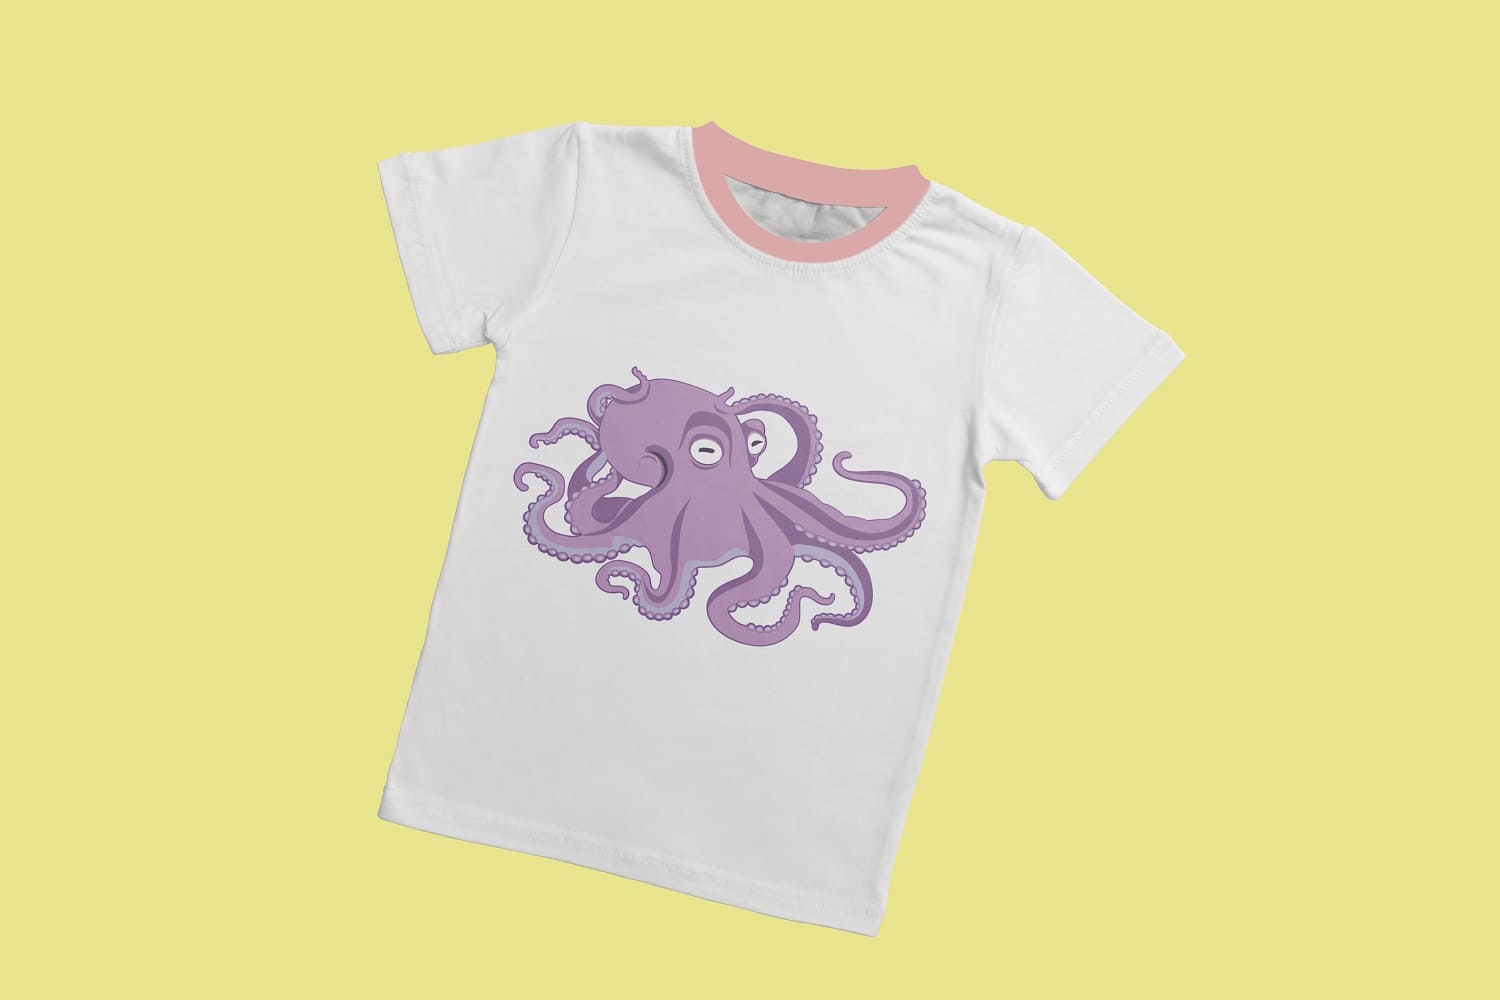 White t-shirt with a purple octopus on a yellow background.